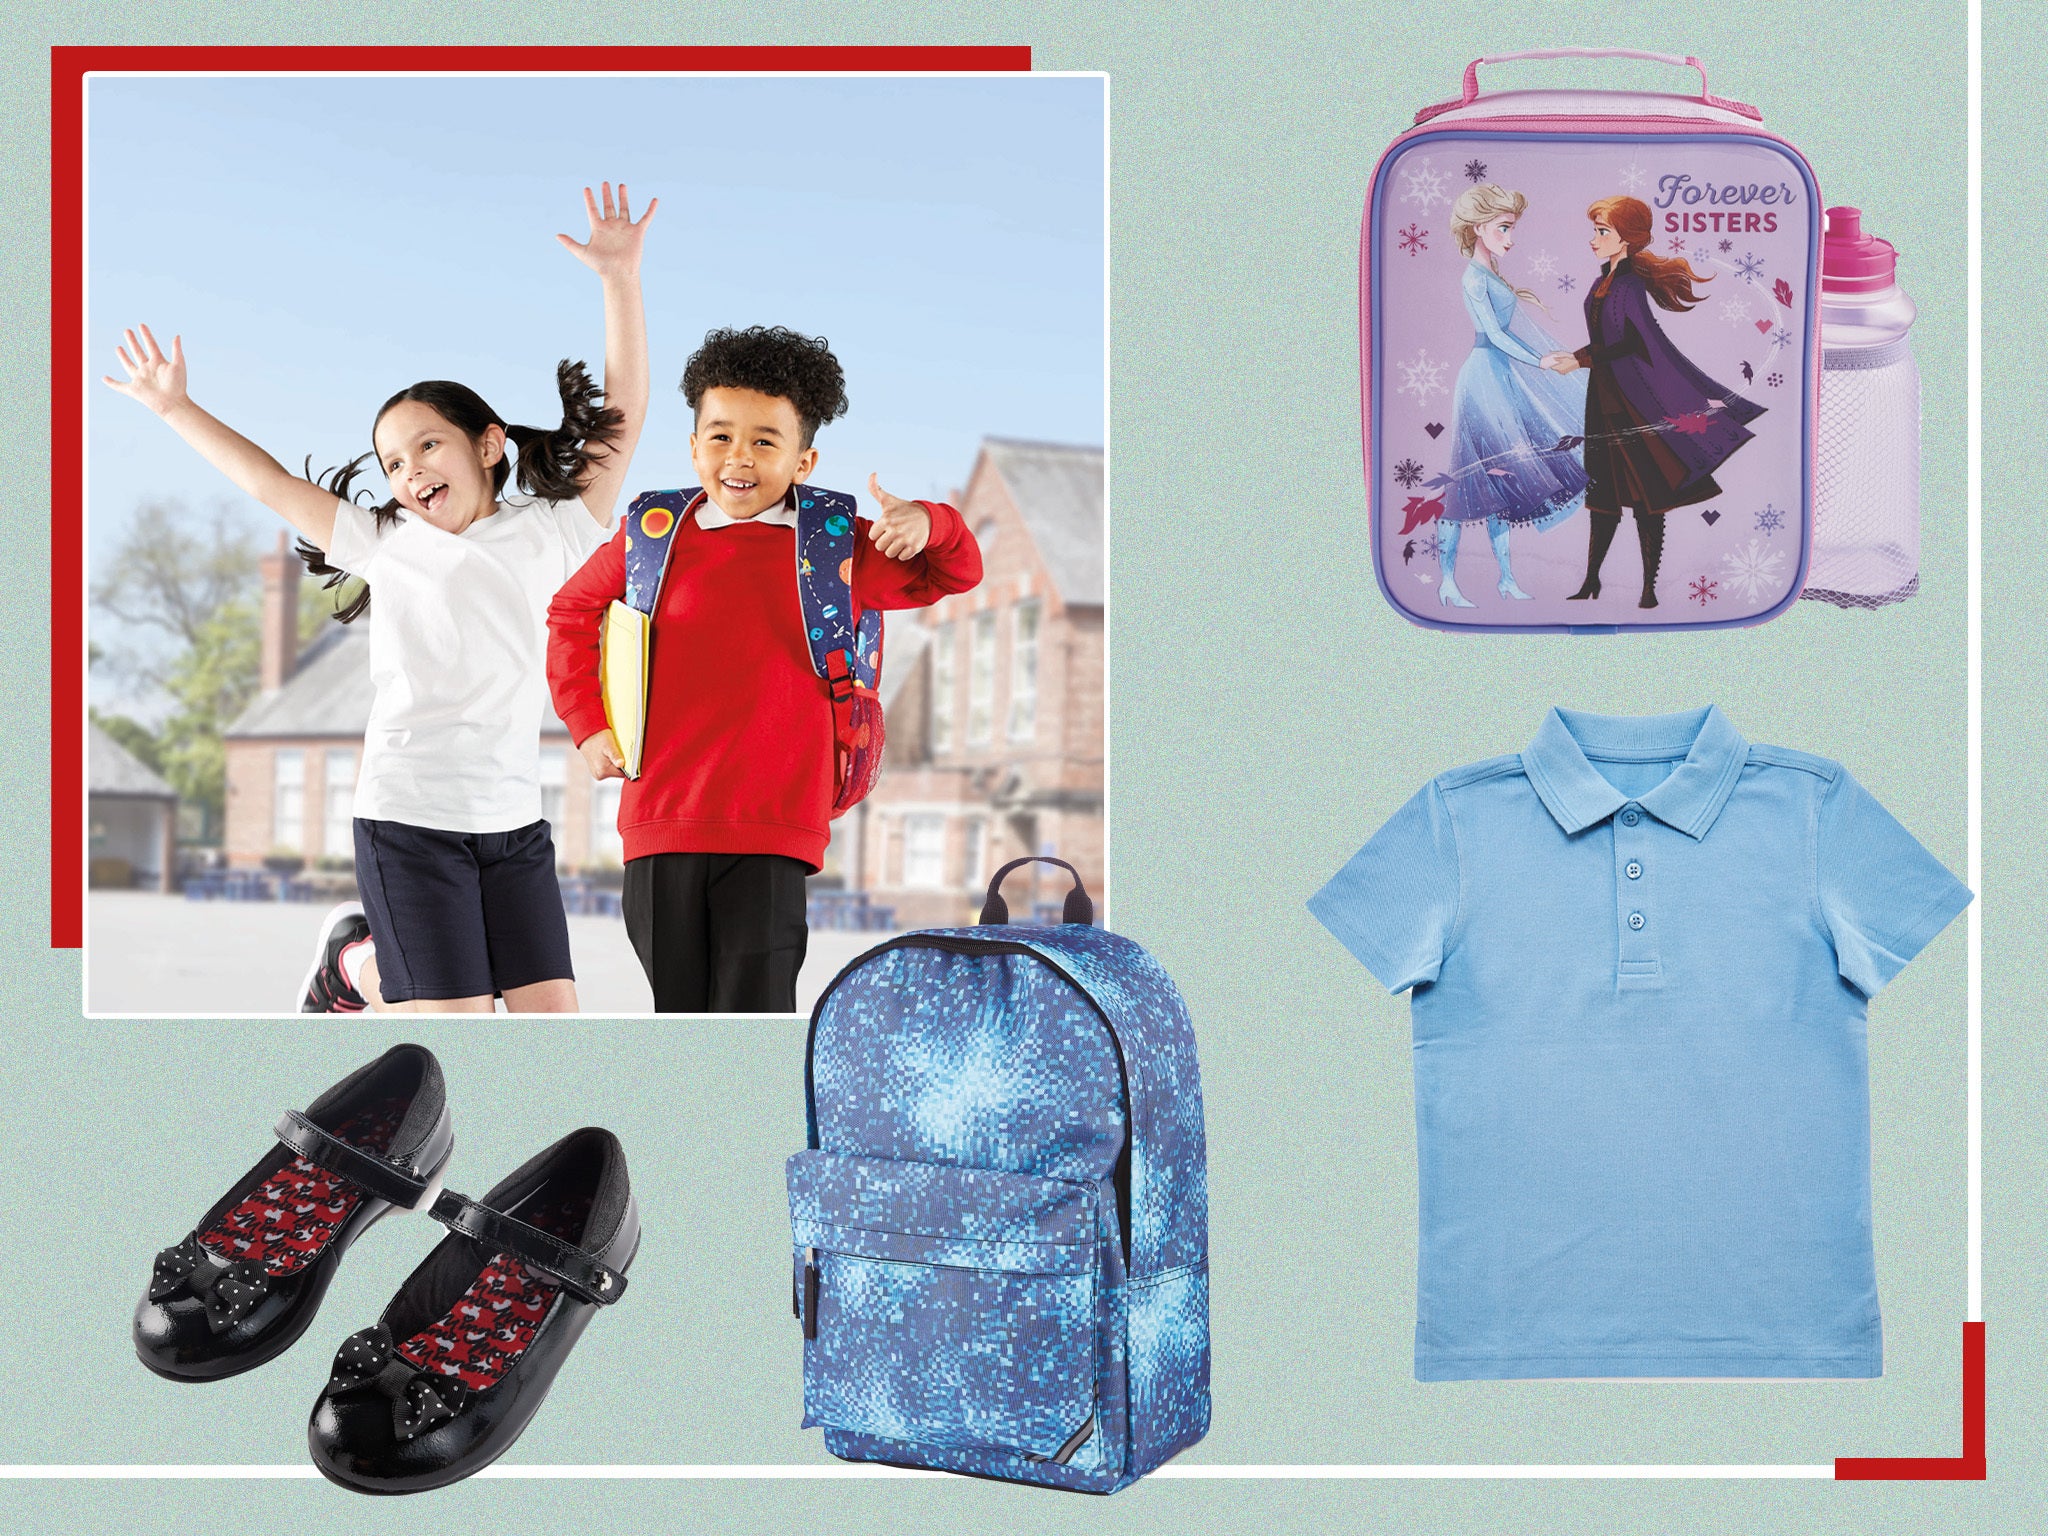 The selection includes everything your child will need, from shirts to shoes